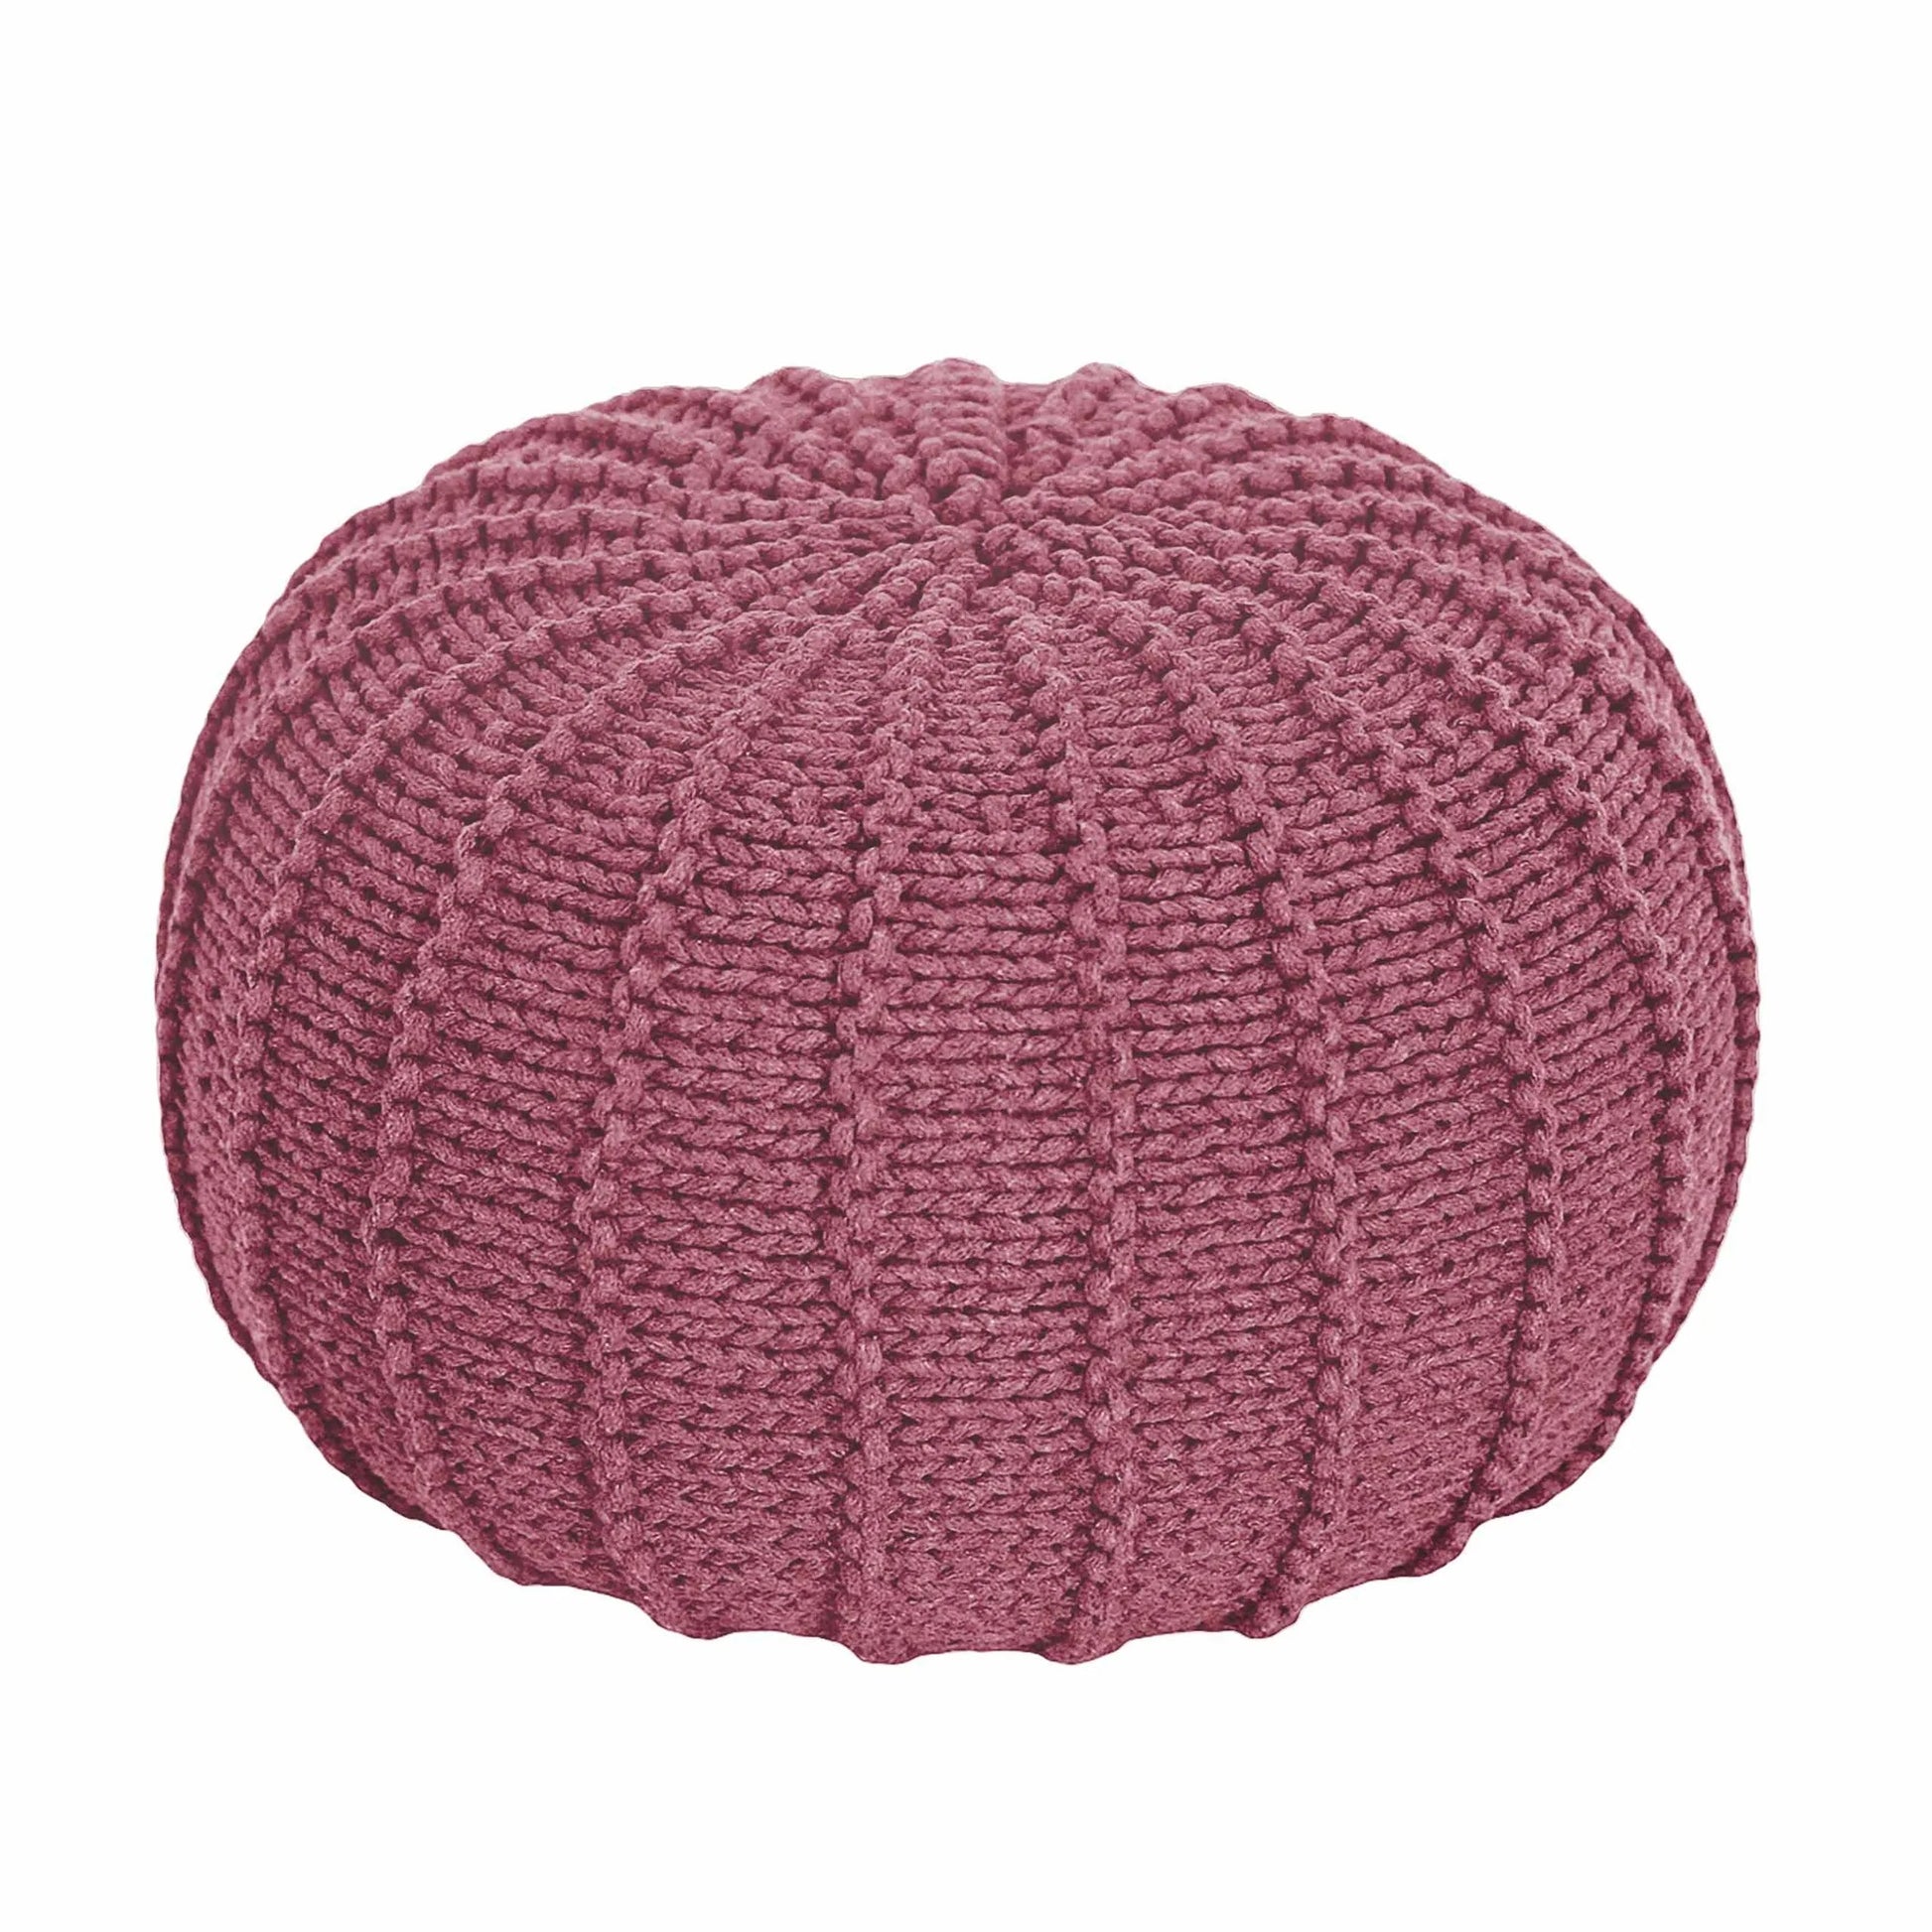 Zuri House Knitted Pouffe - Small - Old Rose